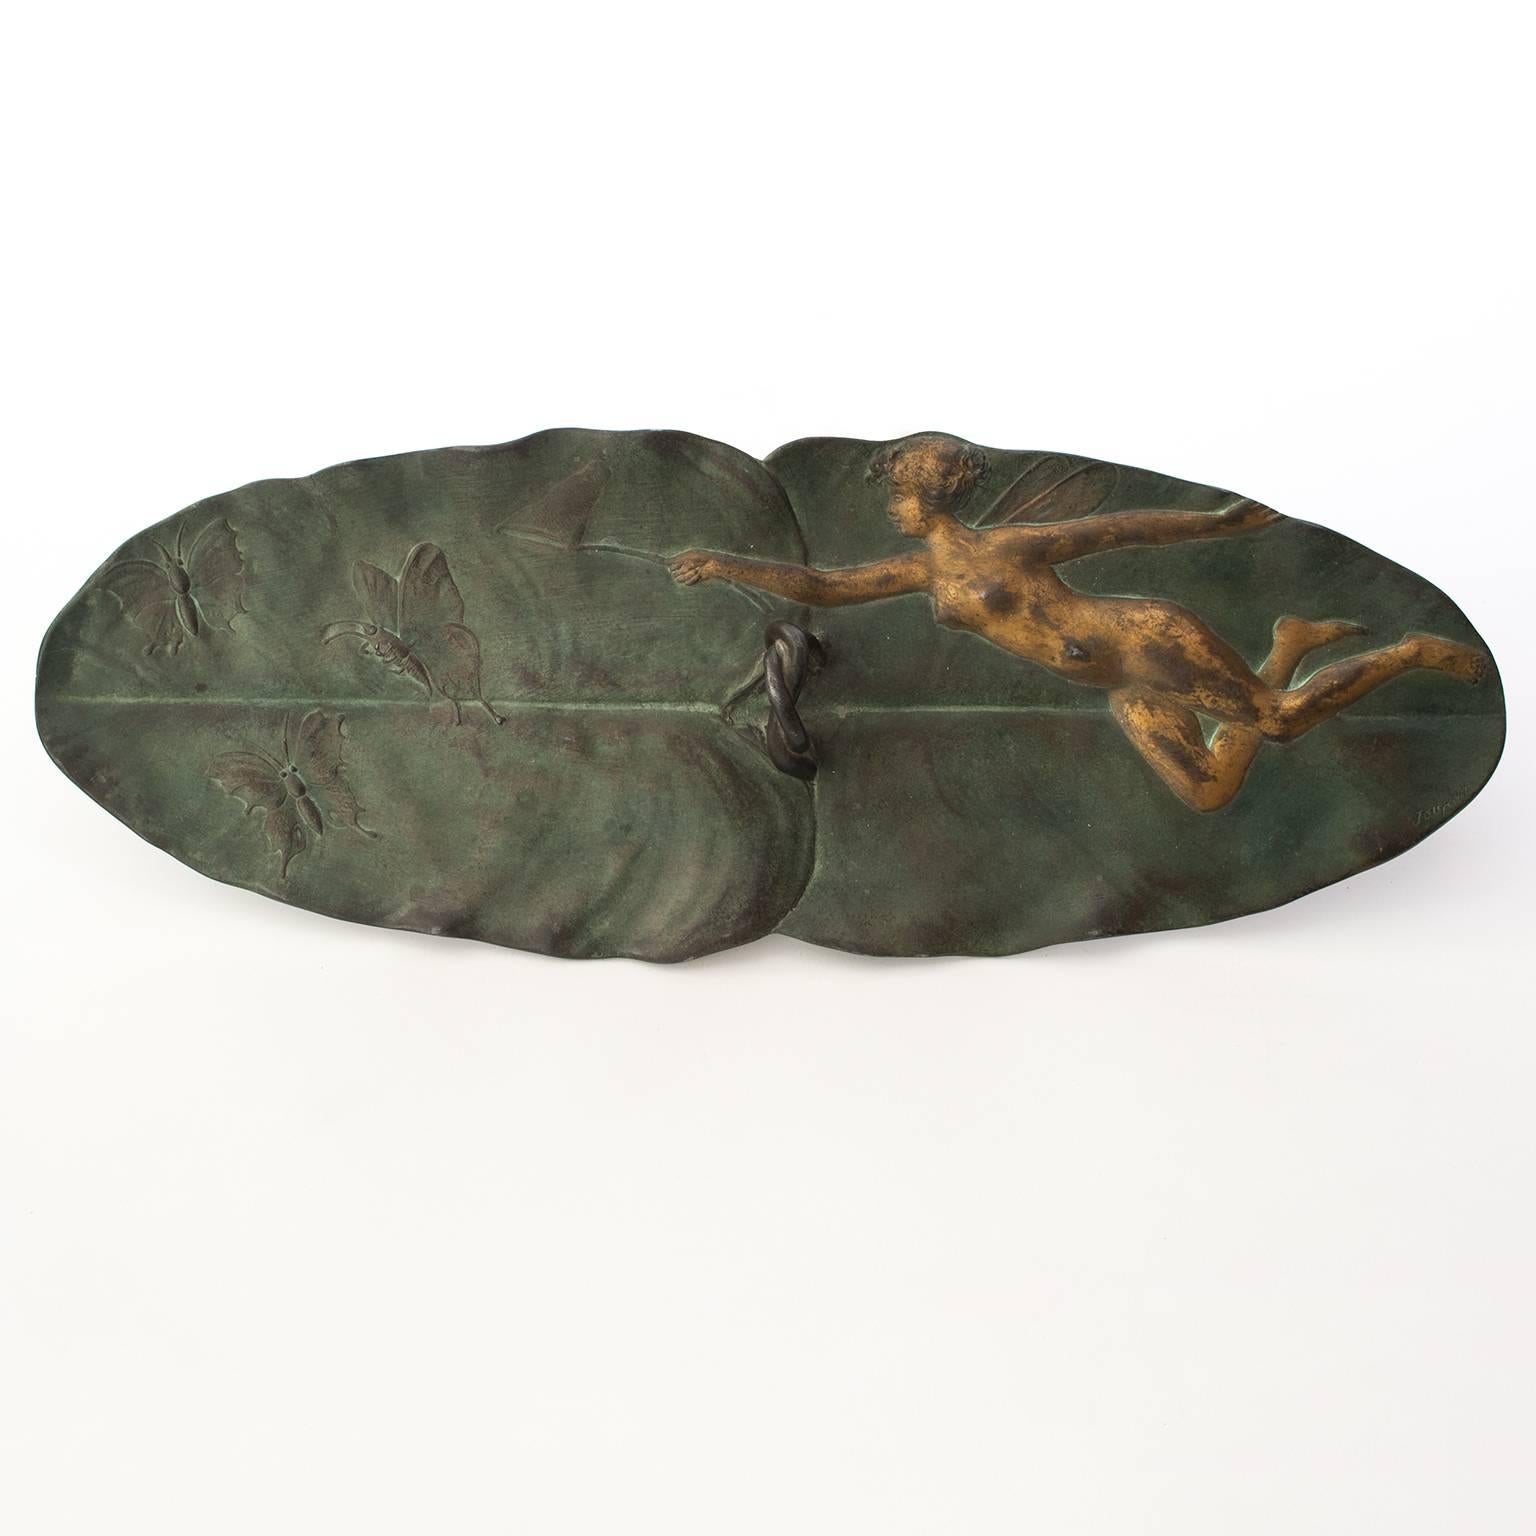 A French Art Nouveau period, painted metal tray in the form of overlapping leaves or lily pads with a center handle. The tray is decorated with a winged female figure in relief holding a wand and is in pursuit of a group of butterflies. Signed